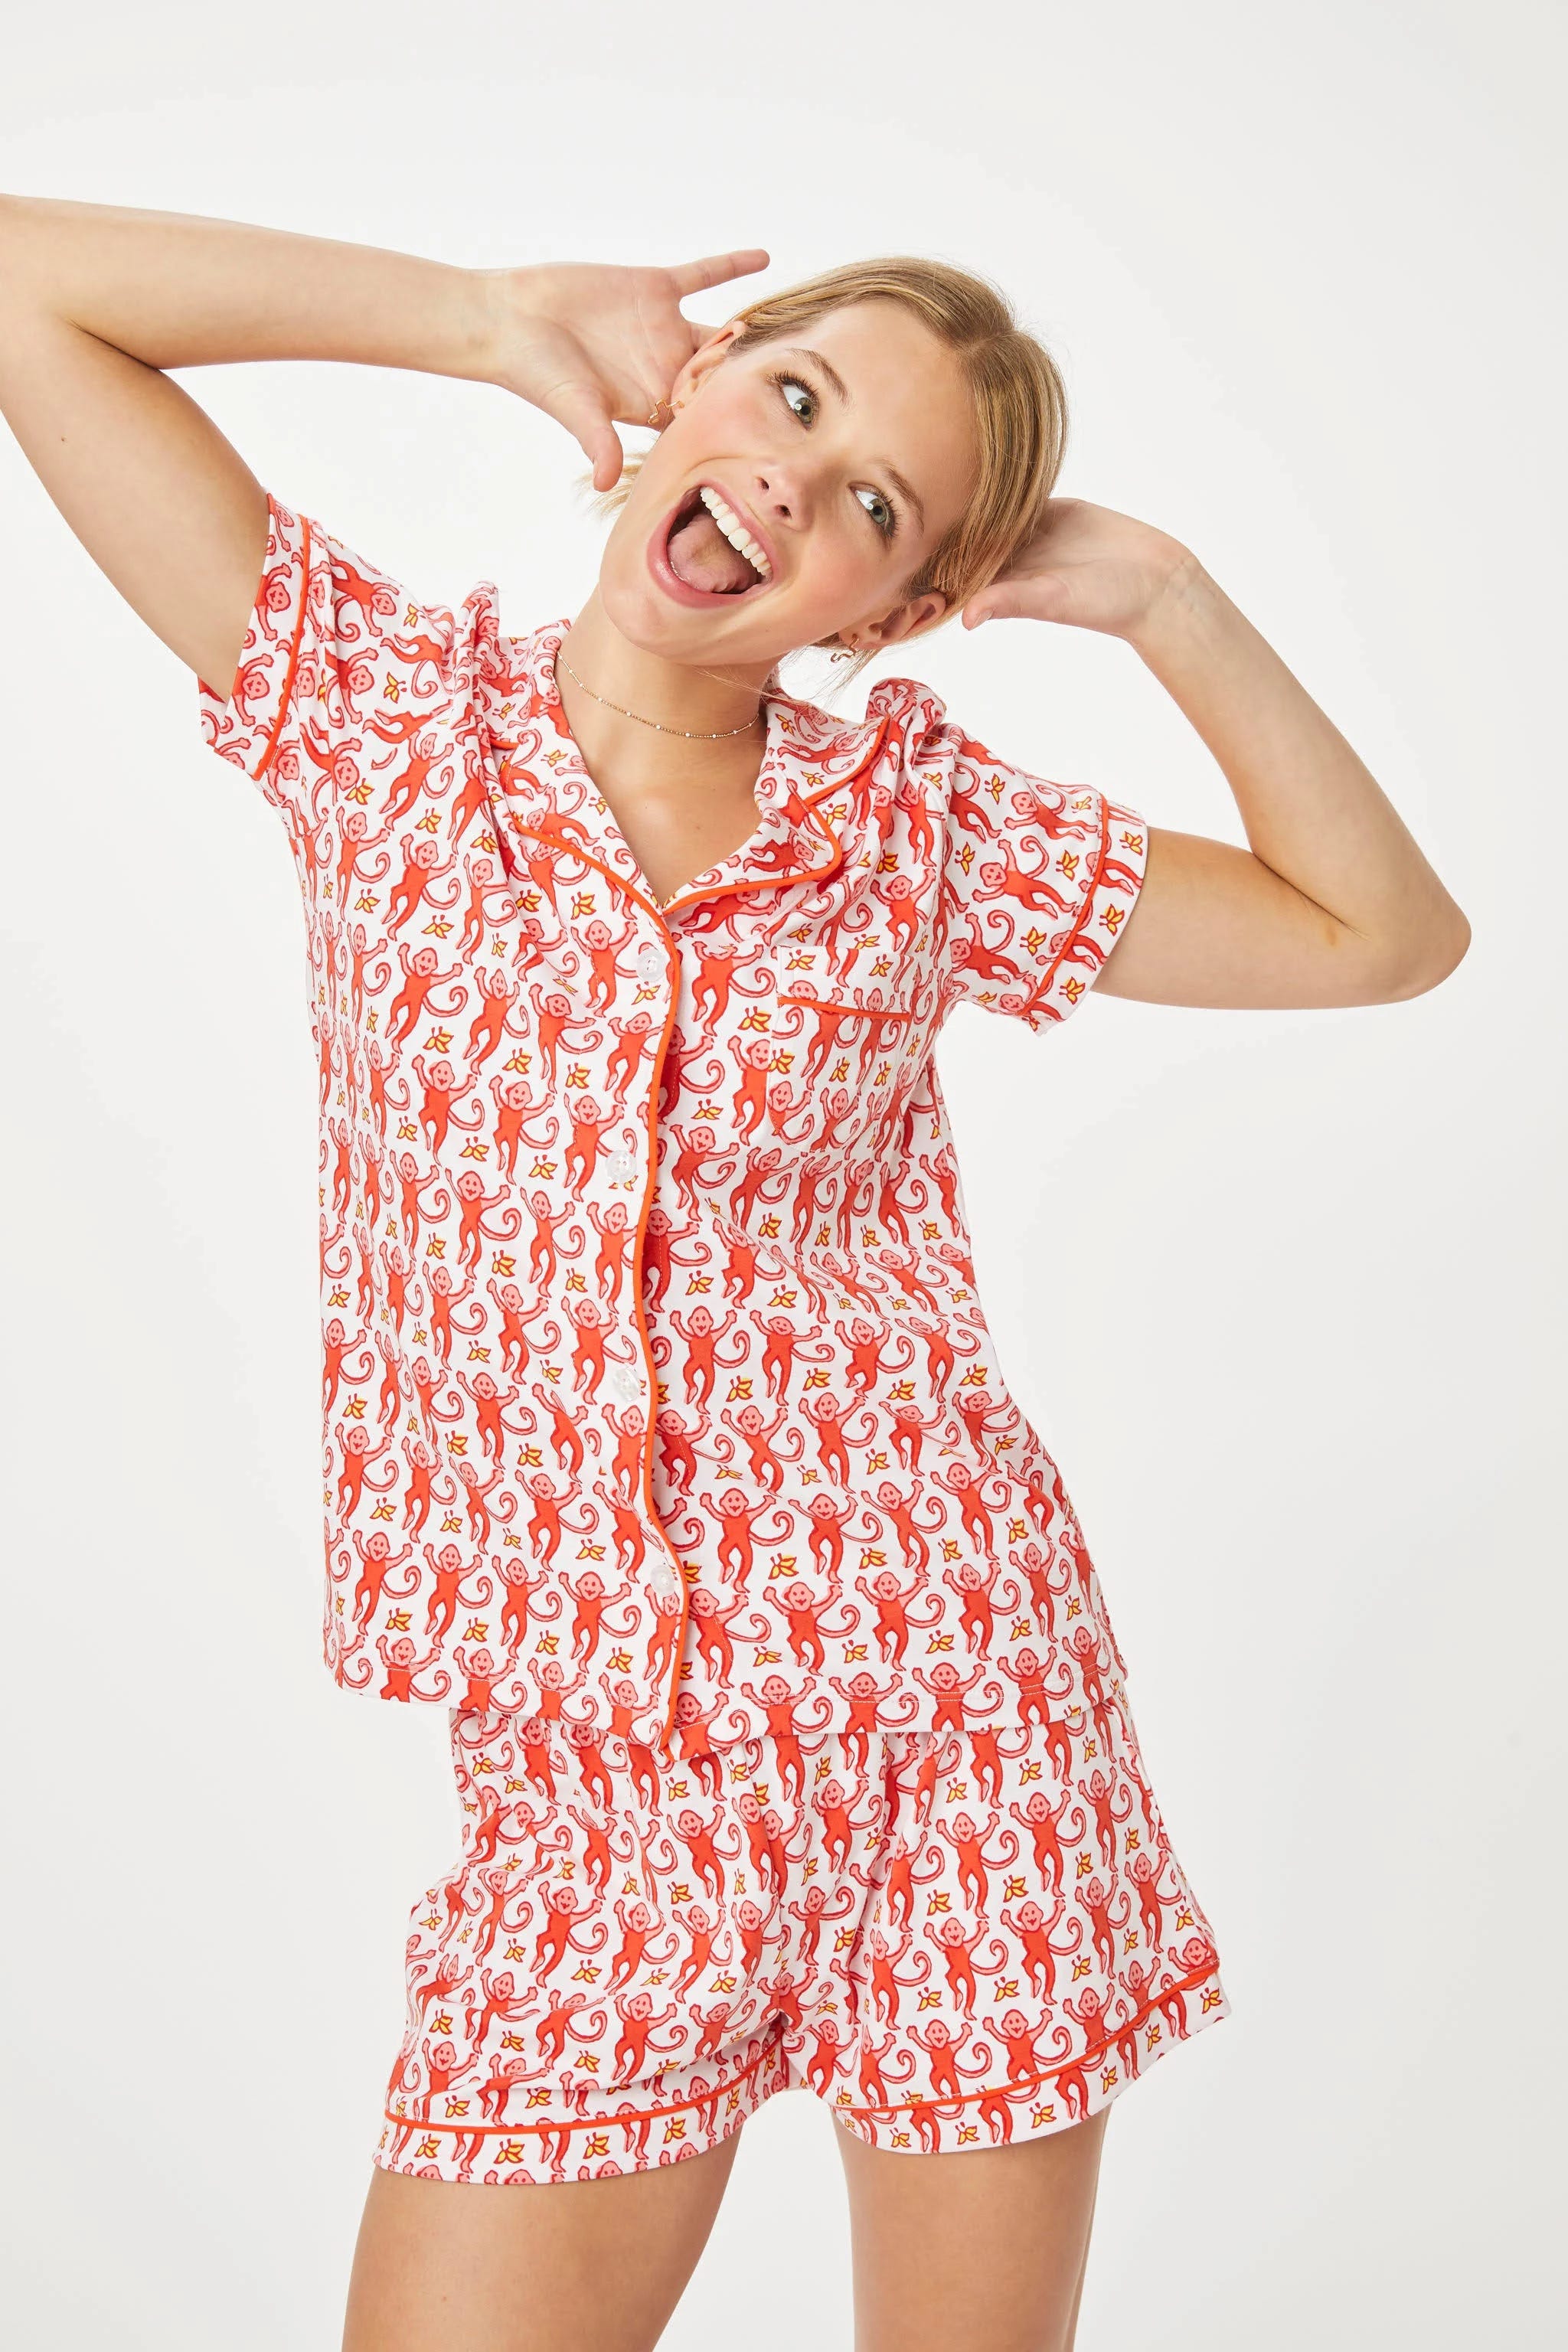 Comfy Watermelon Roller Rabbit Monkey Pajamas - Perfect for Brunch! | Image